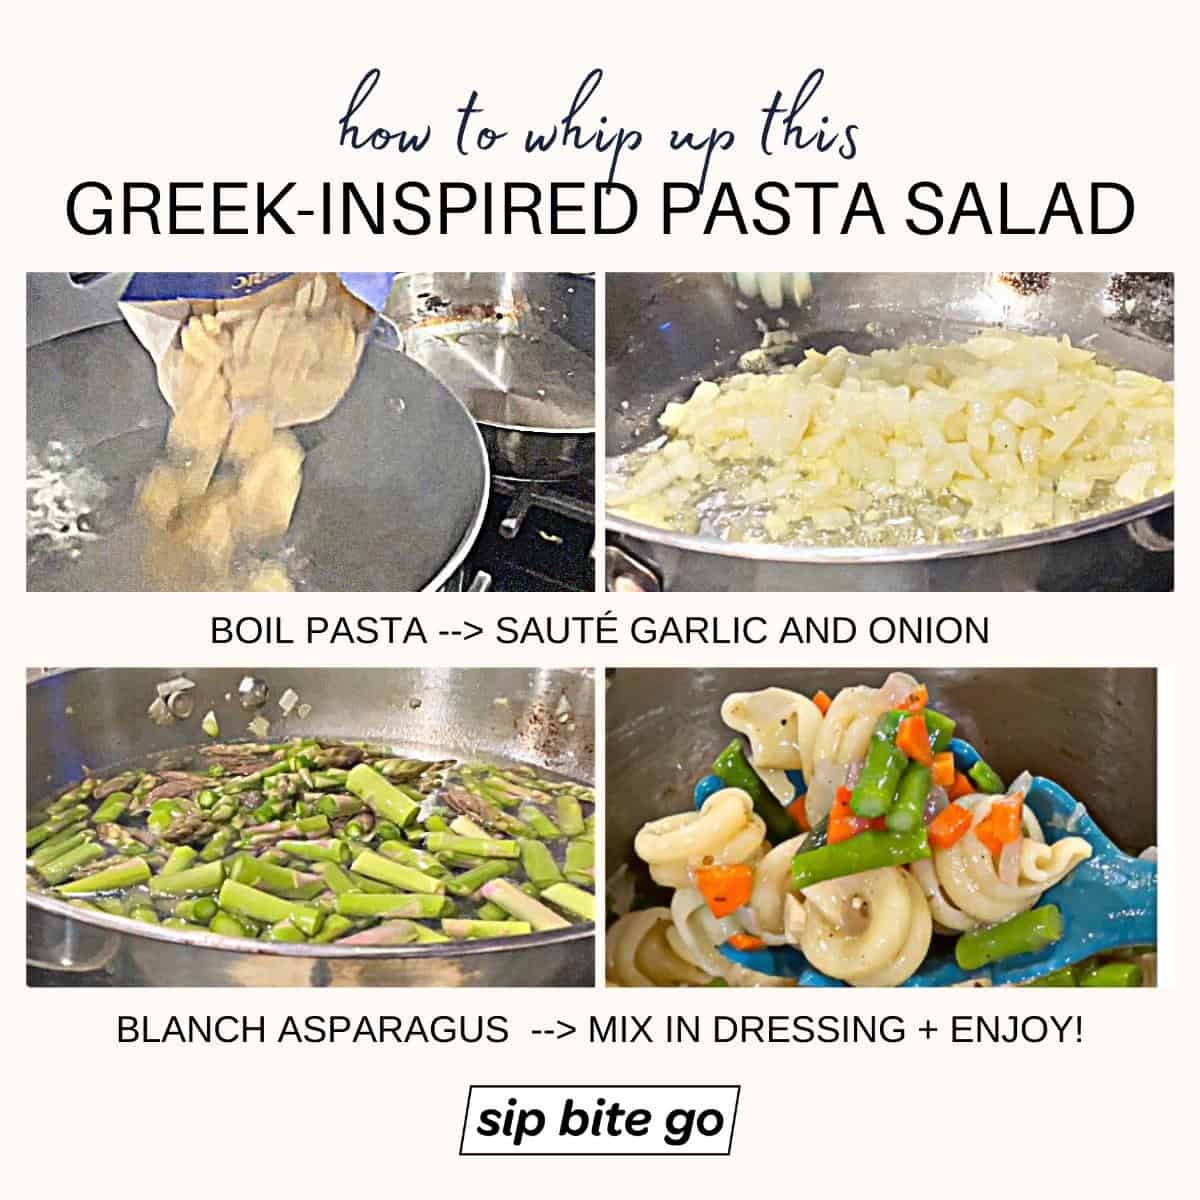 infographic showing how to make recipe for Greek pasta salad dish